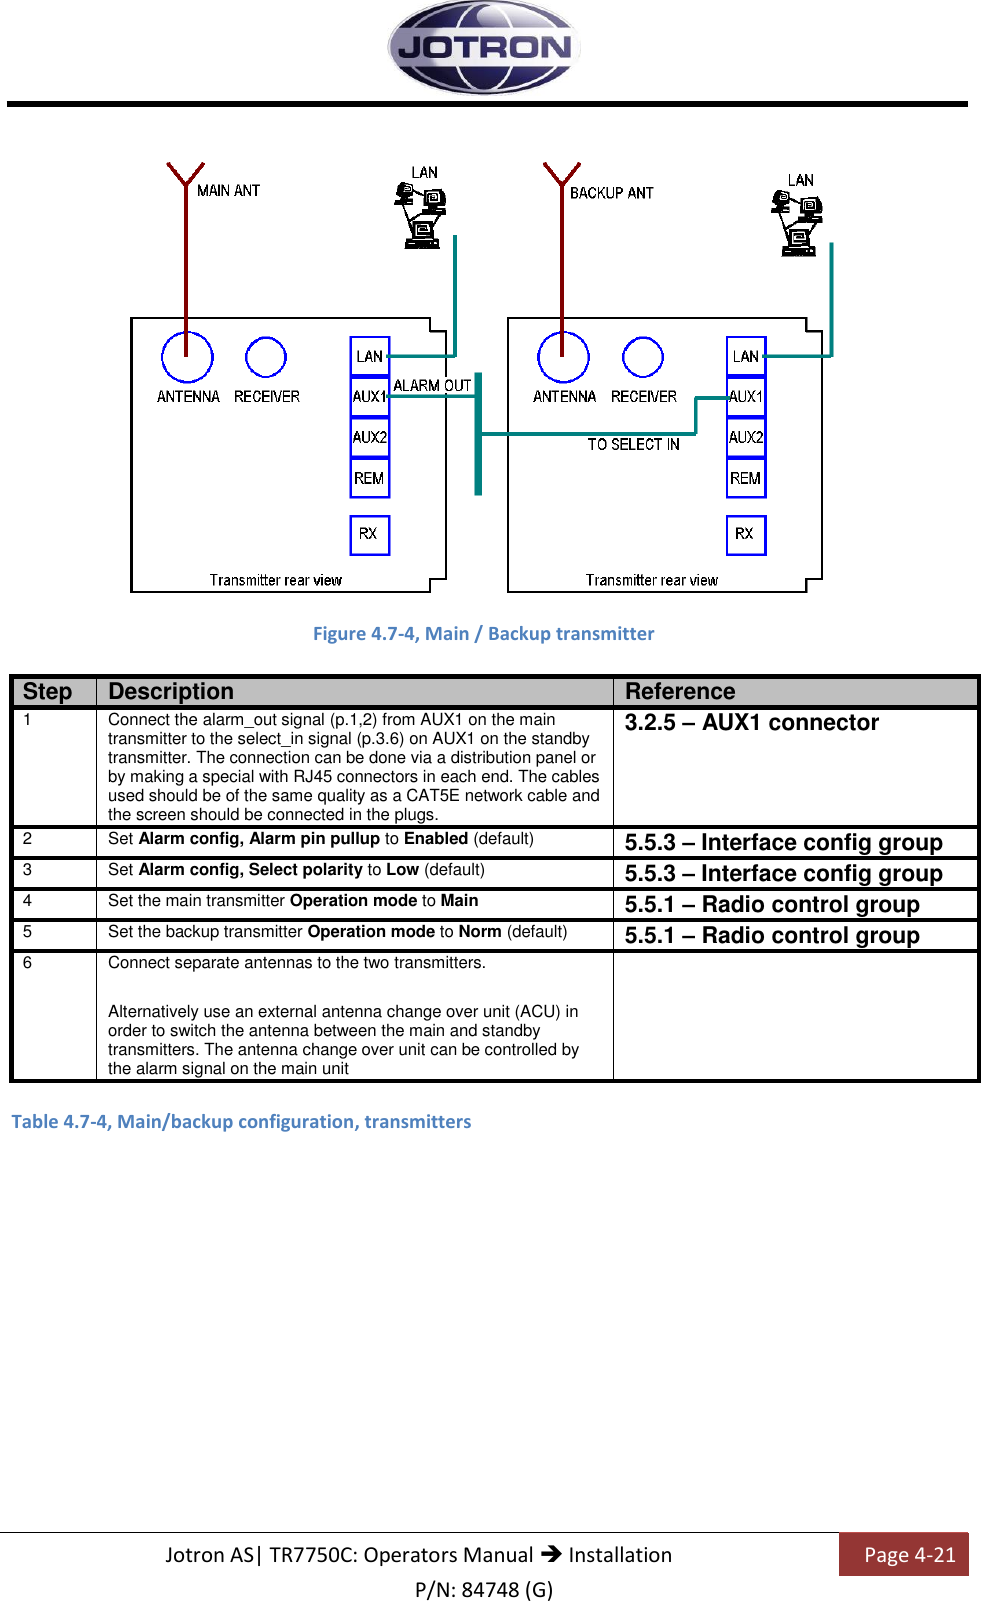   Jotron AS| TR7750C: Operators Manual  Installation Page 4-21 P/N: 84748 (G)   Figure 4.7-4, Main / Backup transmitter  Step Description Reference 1 Connect the alarm_out signal (p.1,2) from AUX1 on the main transmitter to the select_in signal (p.3.6) on AUX1 on the standby transmitter. The connection can be done via a distribution panel or by making a special with RJ45 connectors in each end. The cables used should be of the same quality as a CAT5E network cable and the screen should be connected in the plugs. 3.2.5 – AUX1 connector 2 Set Alarm config, Alarm pin pullup to Enabled (default) 5.5.3 – Interface config group 3 Set Alarm config, Select polarity to Low (default) 5.5.3 – Interface config group 4 Set the main transmitter Operation mode to Main  5.5.1 – Radio control group 5 Set the backup transmitter Operation mode to Norm (default) 5.5.1 – Radio control group 6 Connect separate antennas to the two transmitters. Alternatively use an external antenna change over unit (ACU) in order to switch the antenna between the main and standby transmitters. The antenna change over unit can be controlled by the alarm signal on the main unit   Table 4.7-4, Main/backup configuration, transmitters  